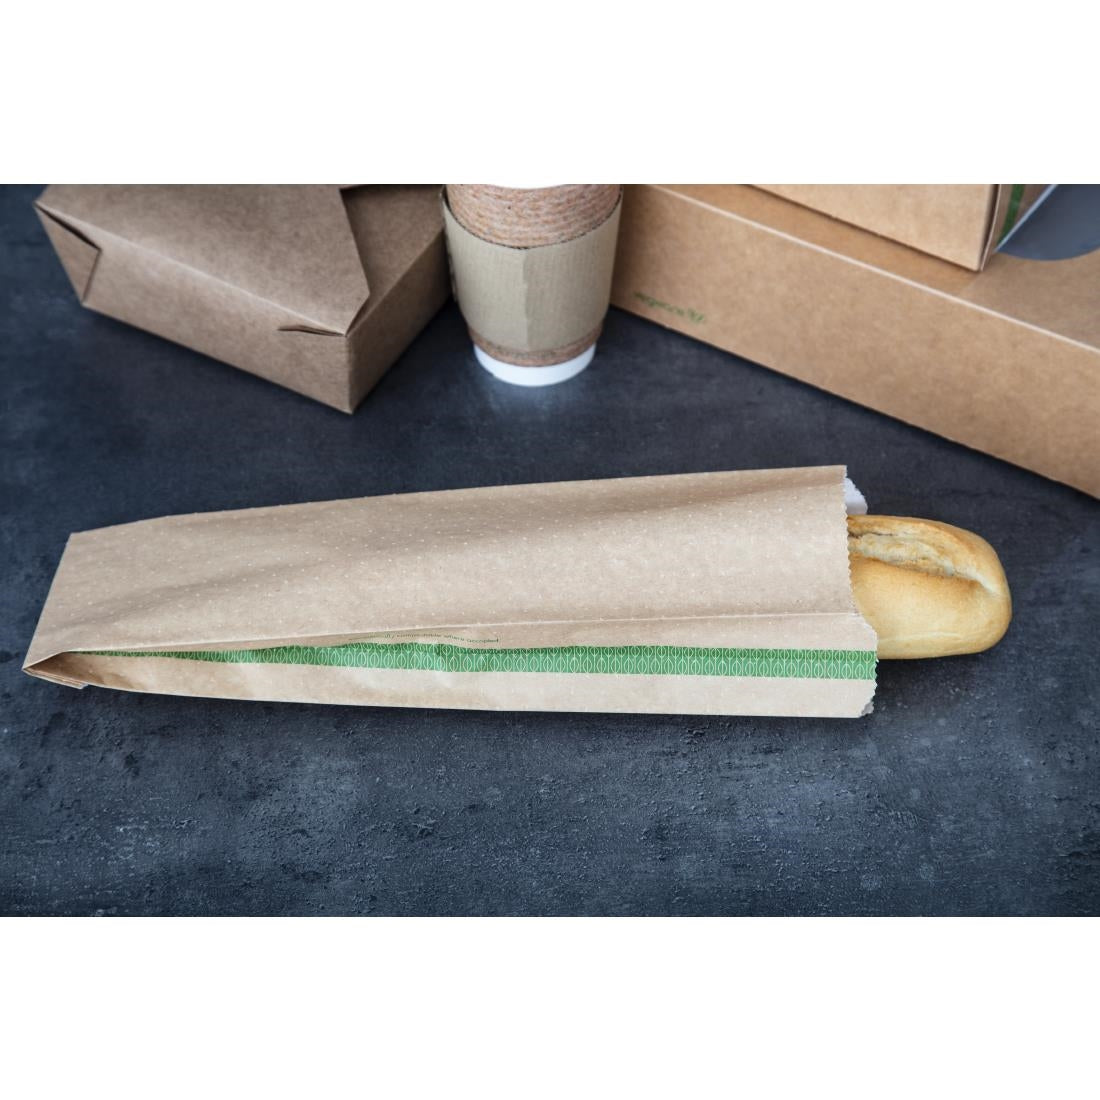 Vegware Compostable Therma Paper Hot Food Bags (Pack of 500)